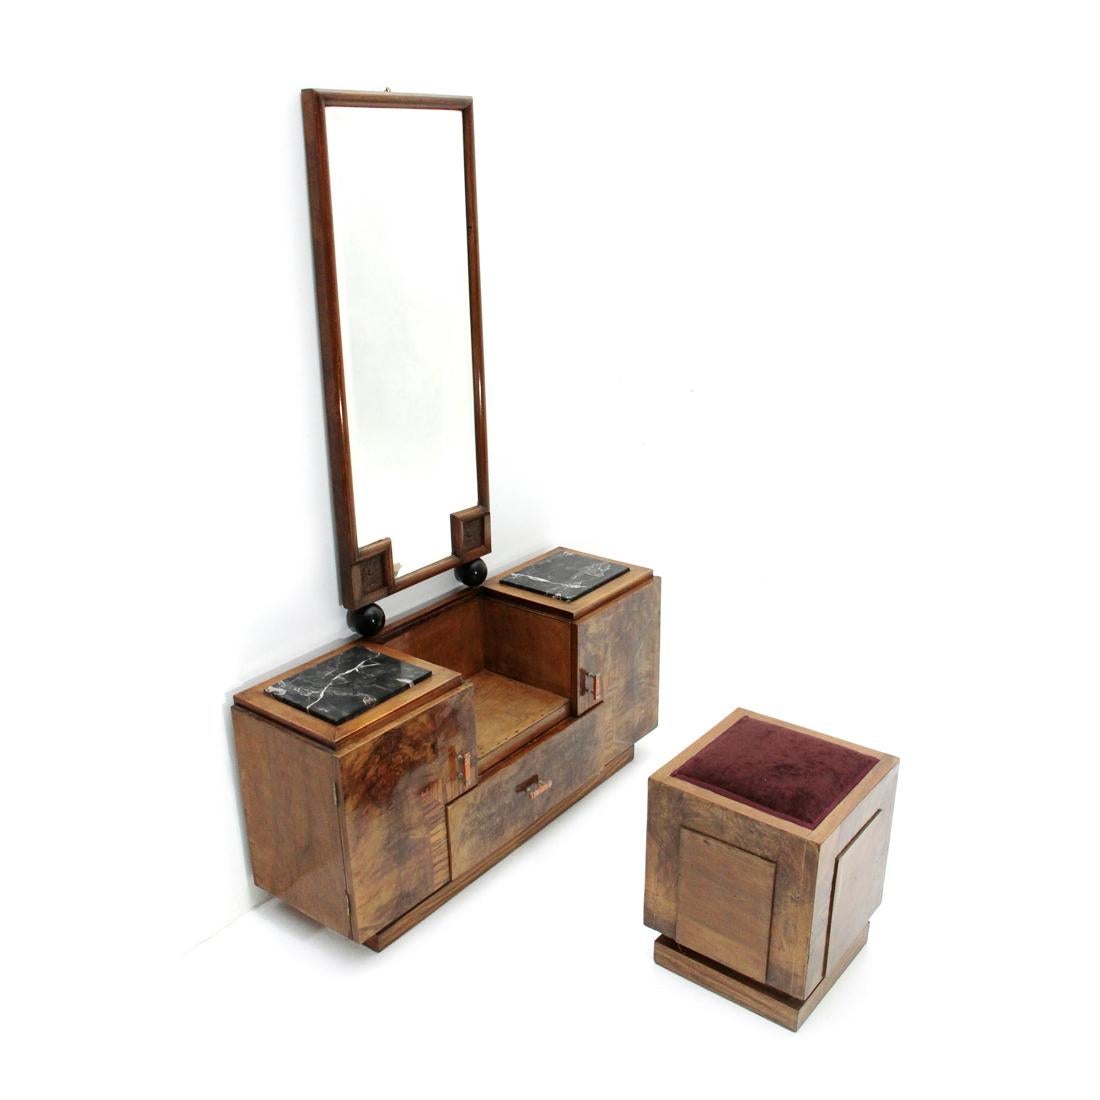 Italian manufacturing toilet produced in the 1930s.
Wood structure veneered in briarwood.
Two floors in black marble with white veins.
Side containers and drawer below.
Handles in aluminum and bakelite.
Mirror with wooden frame.
Pouf in